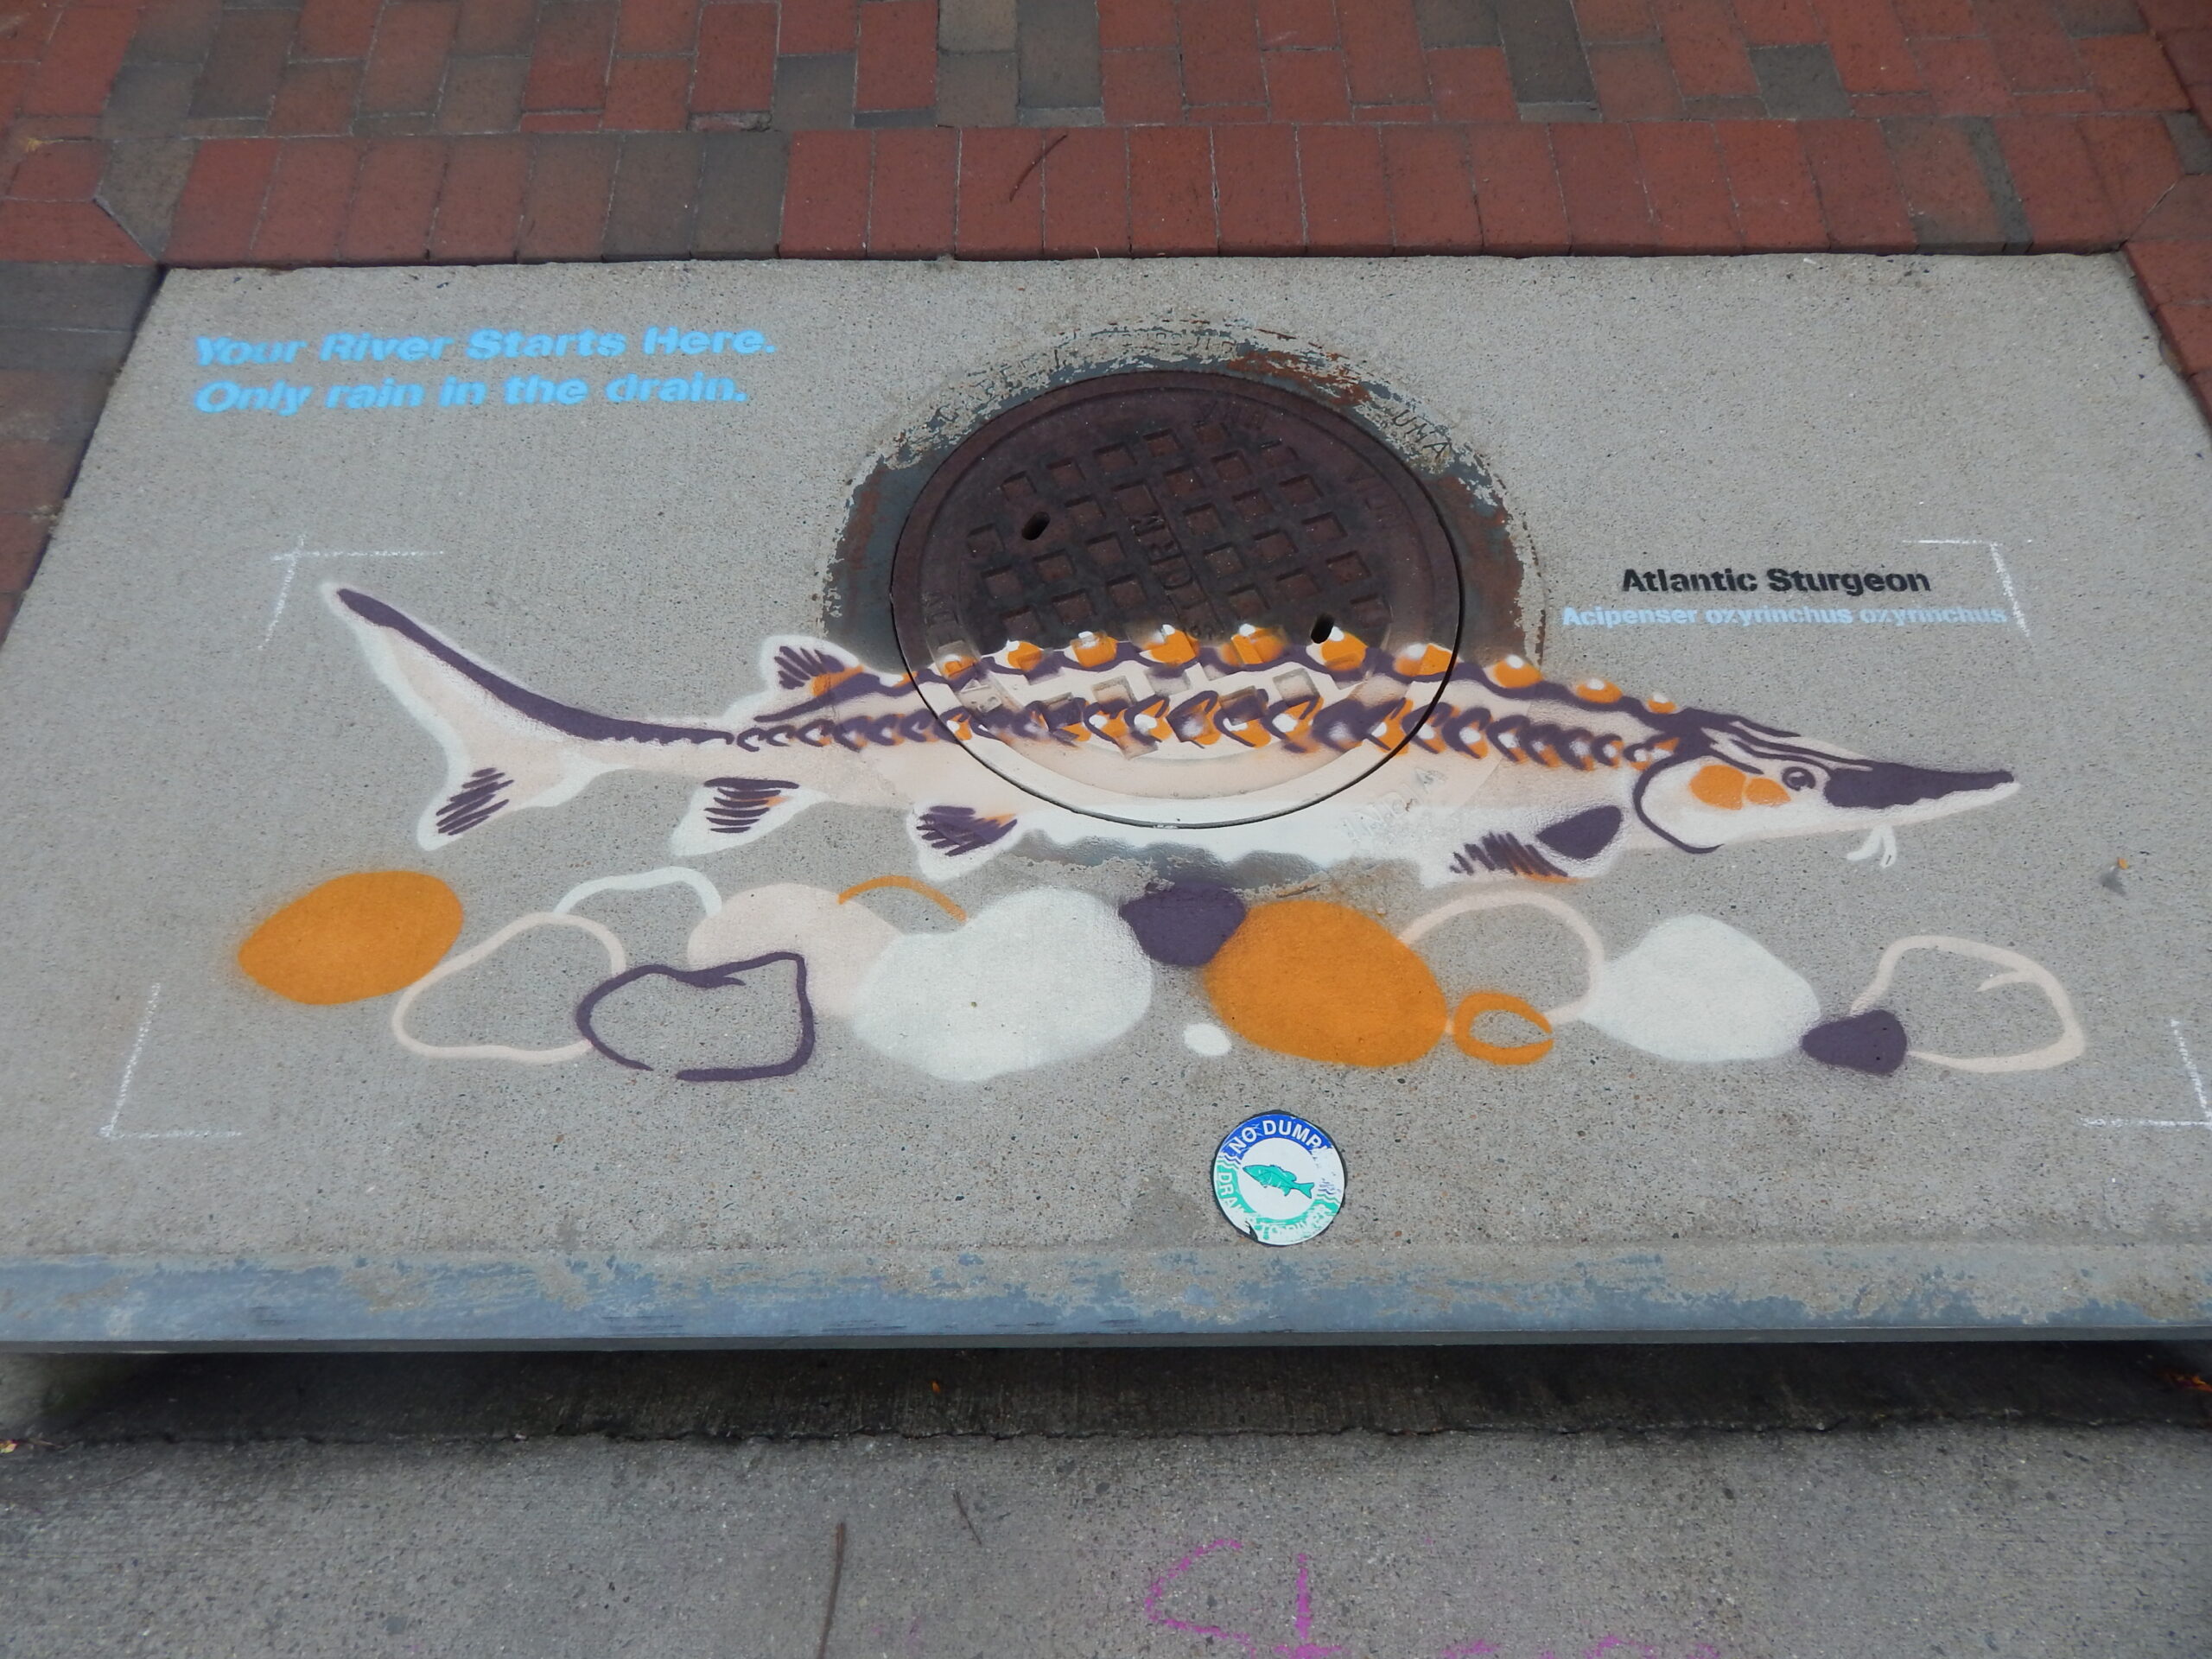 http://orloskystudio.com/wp-content/uploads/2021/01/Paint-Out-Pollution-Hopewell_Atlantic-Sturgeon-scaled.jpg